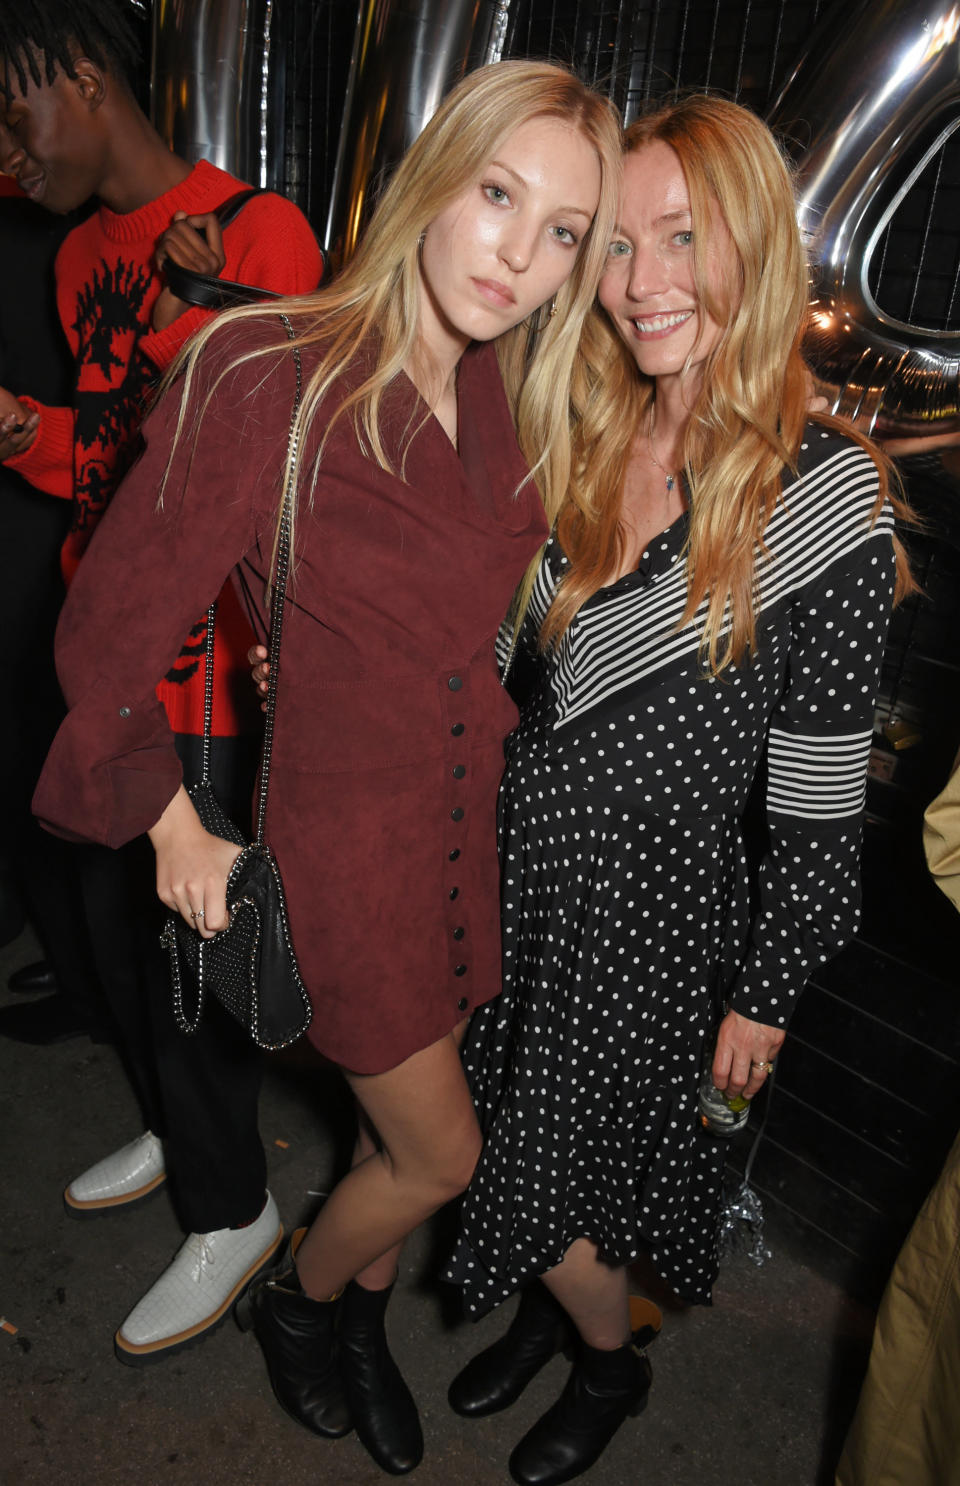 Lucie de la Falaise (right) has modeled for&nbsp;brands like Yves Saint Laurent and Ann Taylor and appeared on the cover of Vogue. She is also the daughter-in-law of Keith Richards and niece of jewelry designer and YSL muse Loulou de la Falaise. <br /><br />Her daughter, Ella Richards (Keith Richards' granddaughter), has been gaining popularity in the industry herself, walking&nbsp;in shows for Pringle of Scotland, appearing in <a href="https://www.telegraph.co.uk/fashion/people/who-is-ella-richards-the-new-face-of-burberry/" target="_blank">ads for Burberry</a> and being photographed with her mom for&nbsp;<a href="https://www.instagram.com/p/BWnSFaDn-Cv/?hl=en&amp;taken-by=ellarichardsr" target="_blank">Vogue</a> and <a href="https://www.stellamccartney.com/experience/us/double-act-london-ella-richards-and-lucie-de-la-falaise/" target="_blank">Stella McCartney</a>.